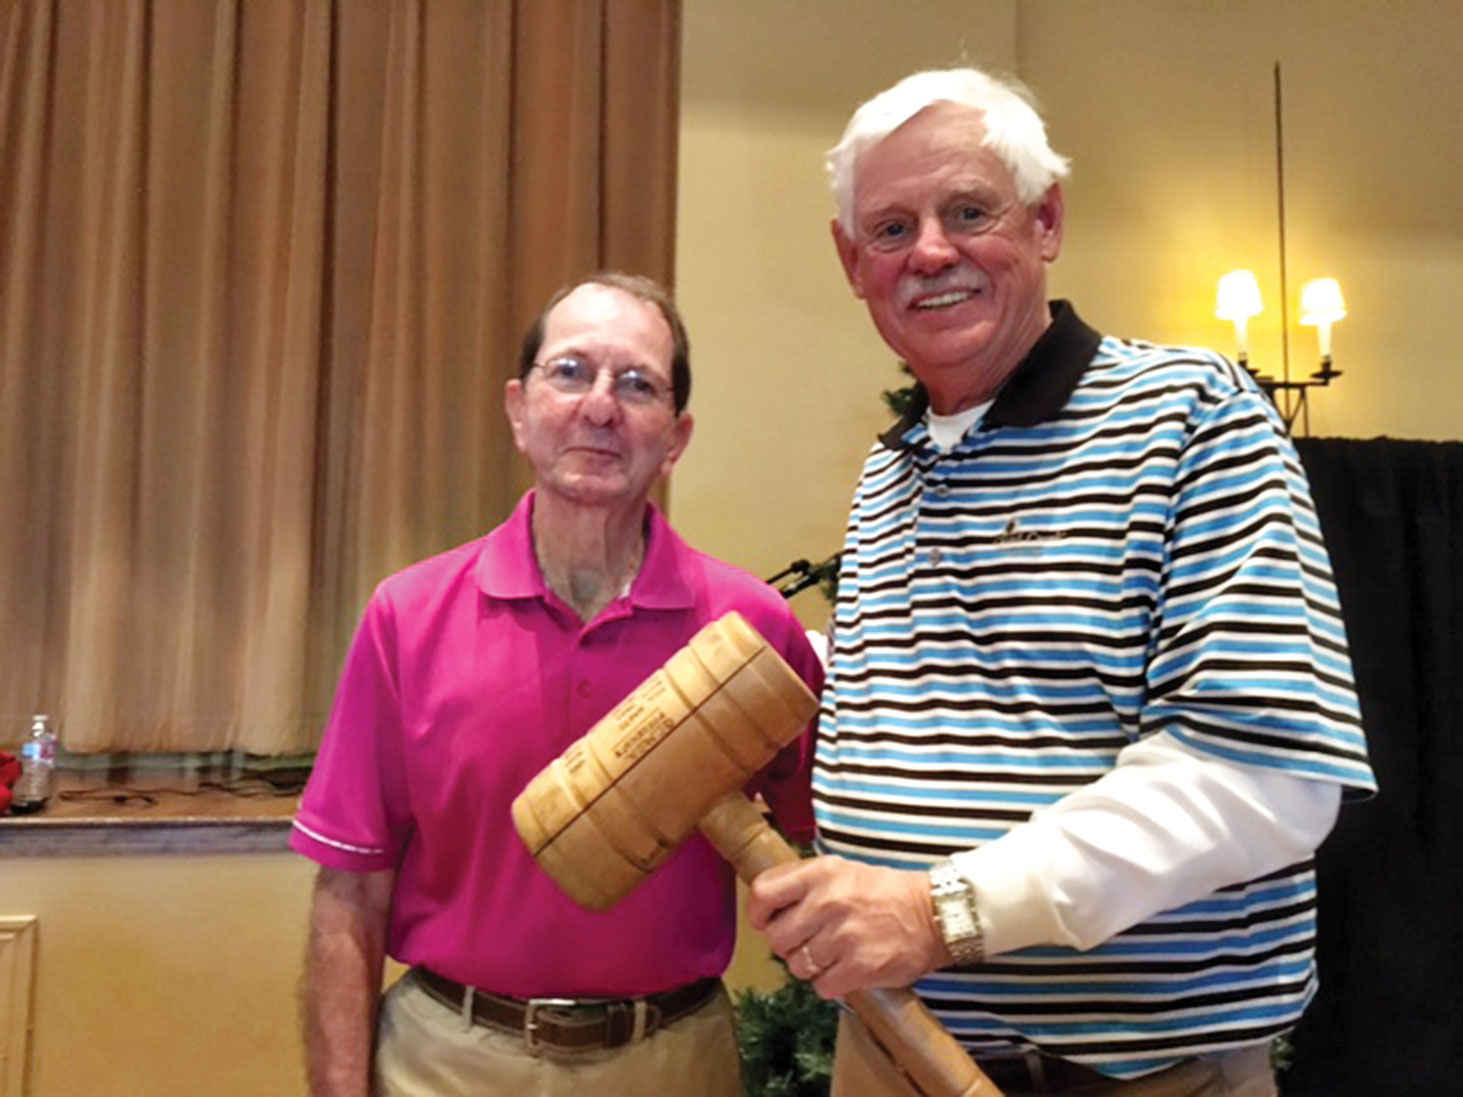 Outgoing President of the QCMGA Skip Fumia passes the gavel to incoming President Tim Phillips at the annual meeting.